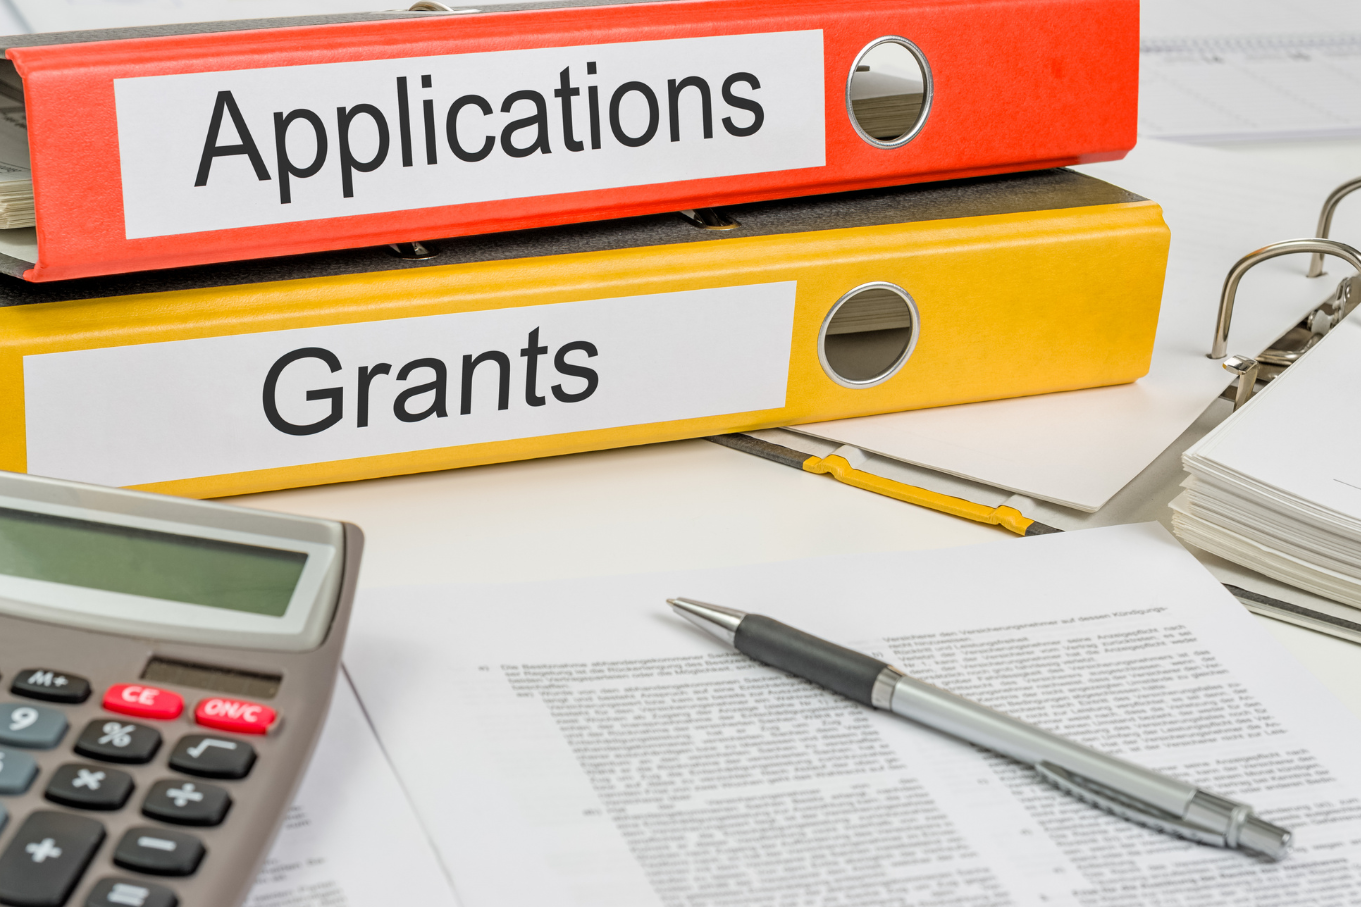 two binders appear on a desk with papers, pen and a calculator. One says &quot;Applications&quot; the other says &quot;Grants.&quot;